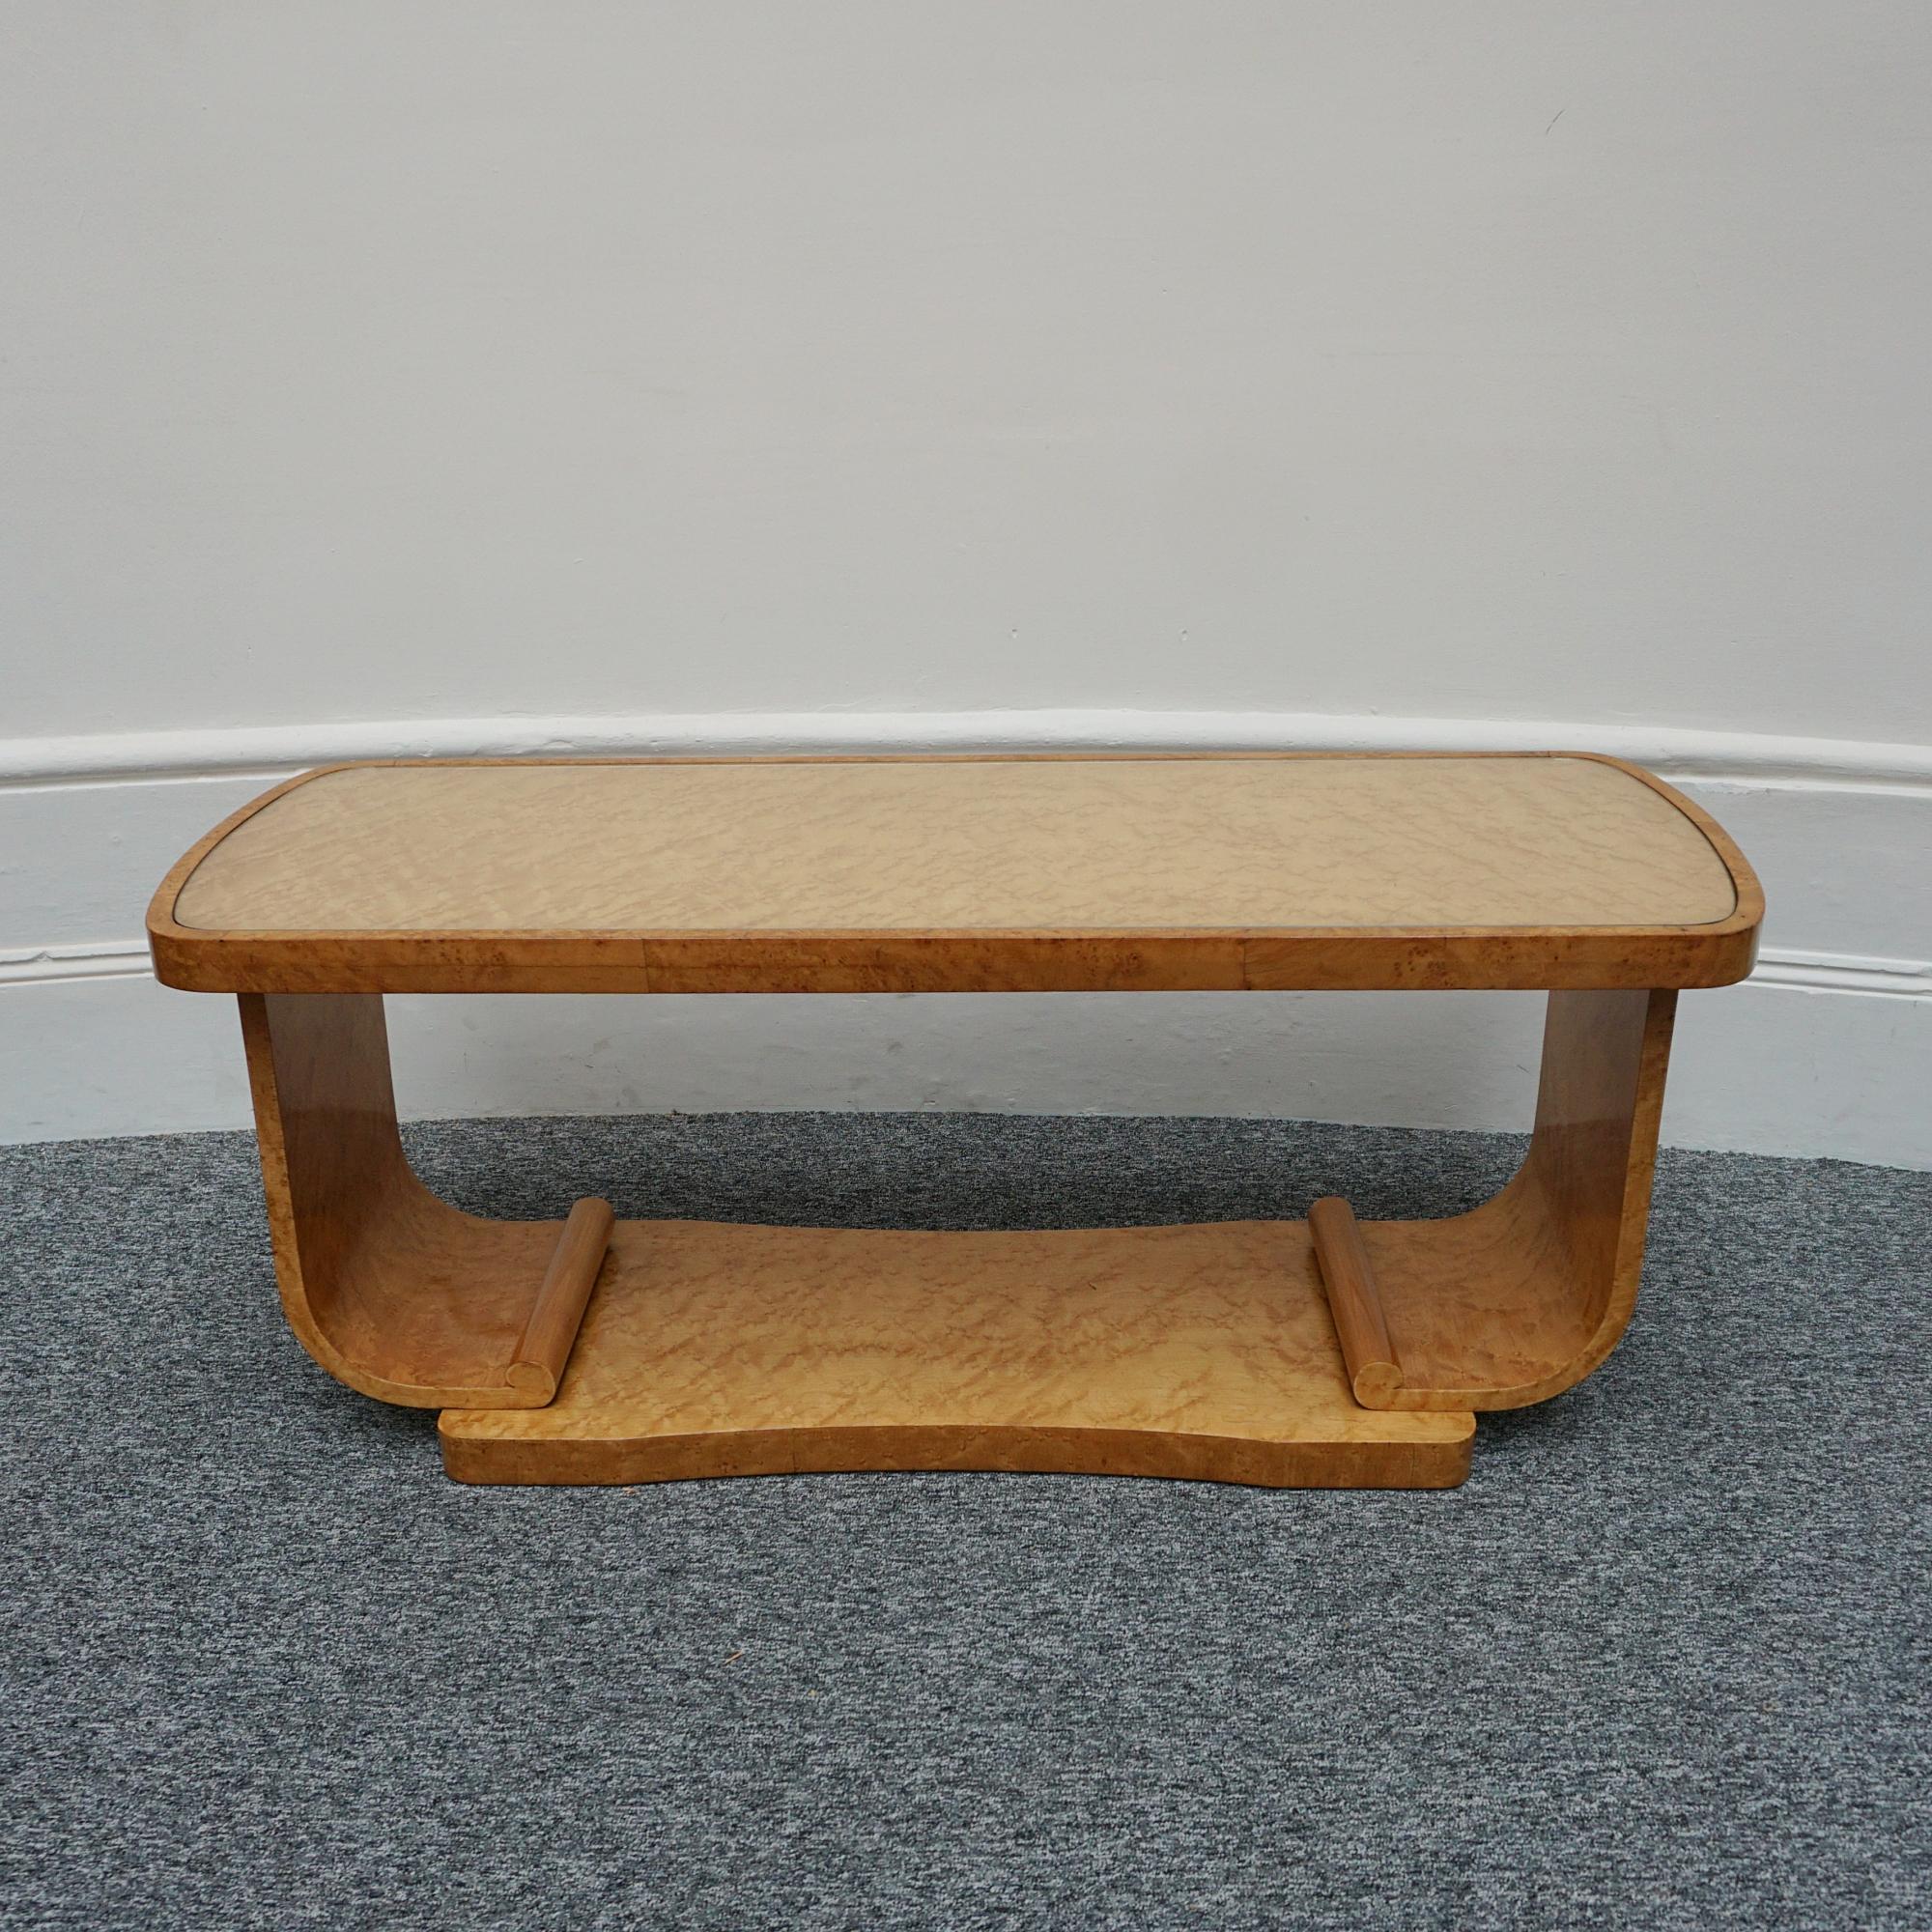 An Art Deco coffee table by Harry & Lou Epstein. Birdseye maple veneered with glass top. 

Dimensions: H 49cm W 122cm D 45.5cm

Origin: English

Date: Circa 1930

Item Number: 1011234

The Epstein company was founded in London during the 1890’s by